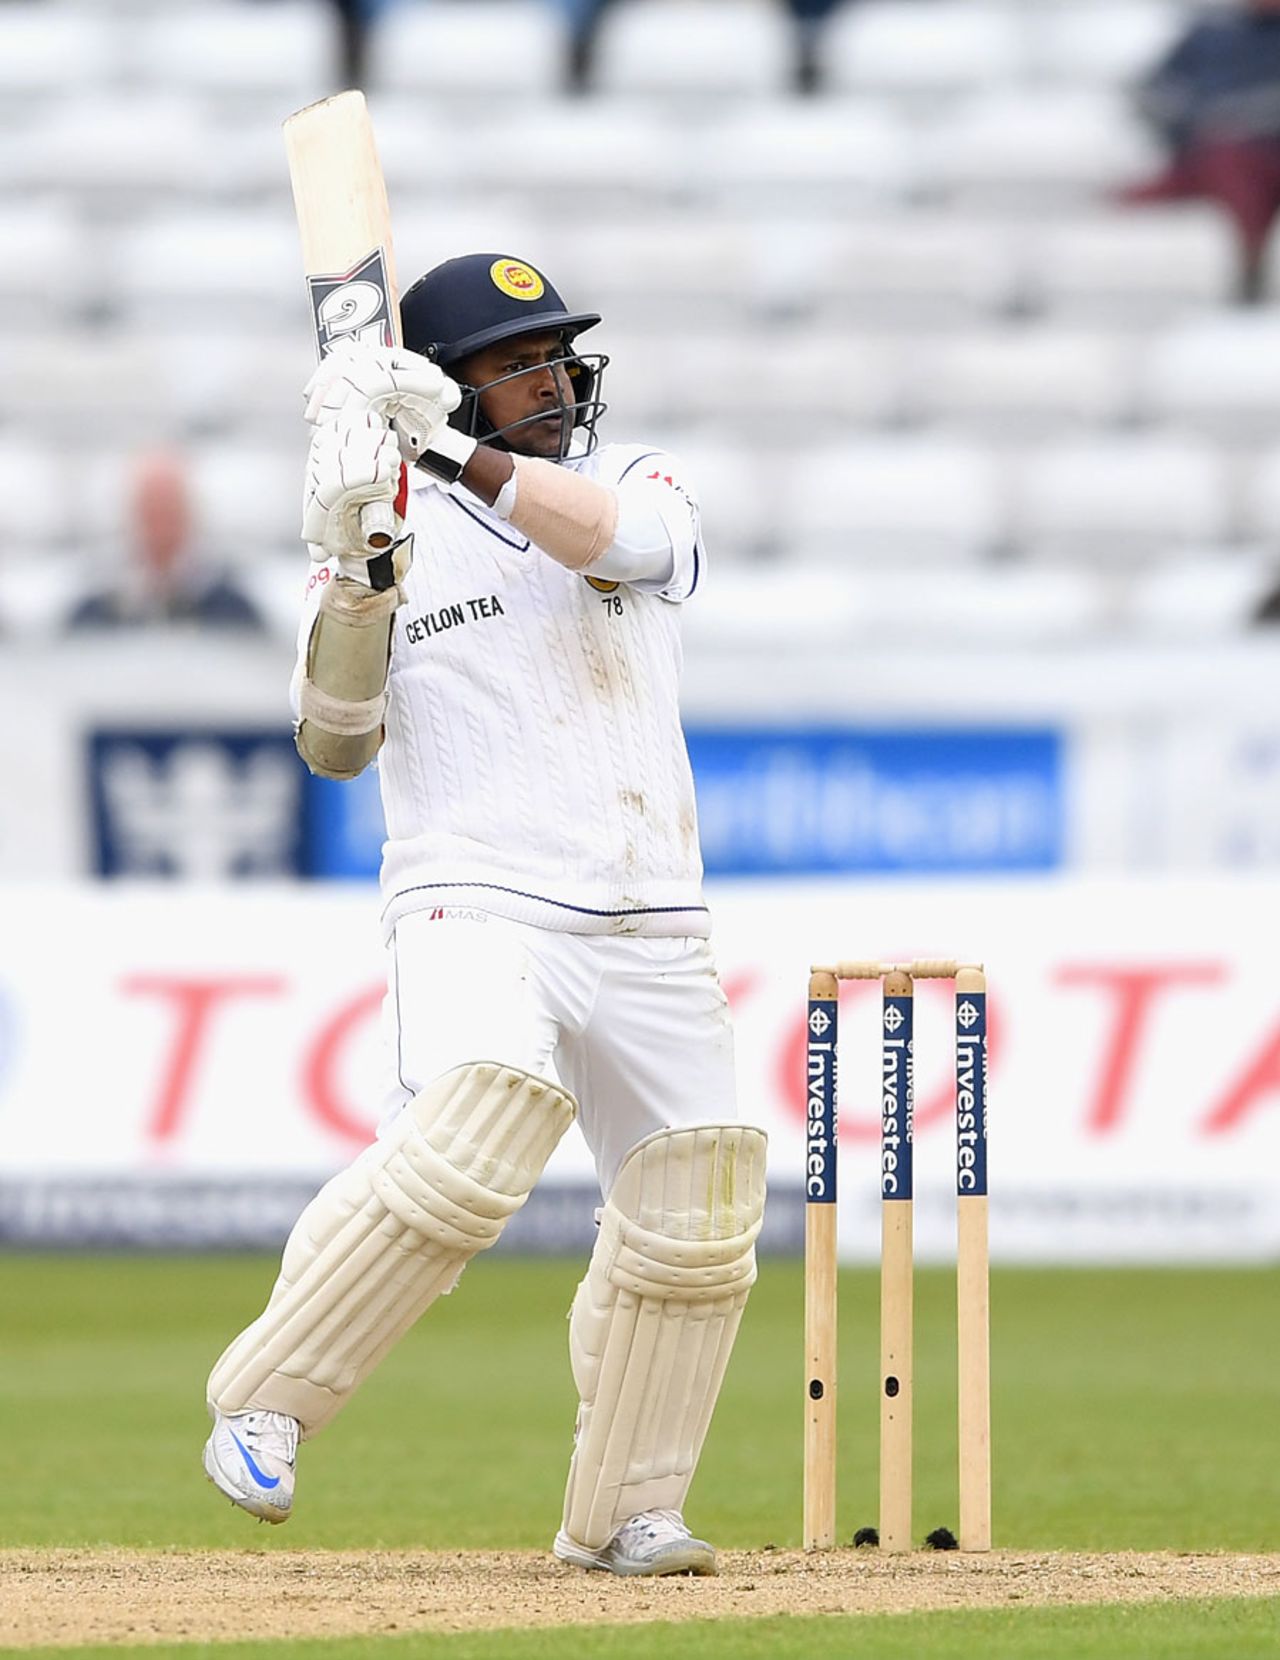 Rangana Herath carves over the off side, England v Sri Lanka, 2nd Test, Chester-le-Street, 4th day, May 30, 2016